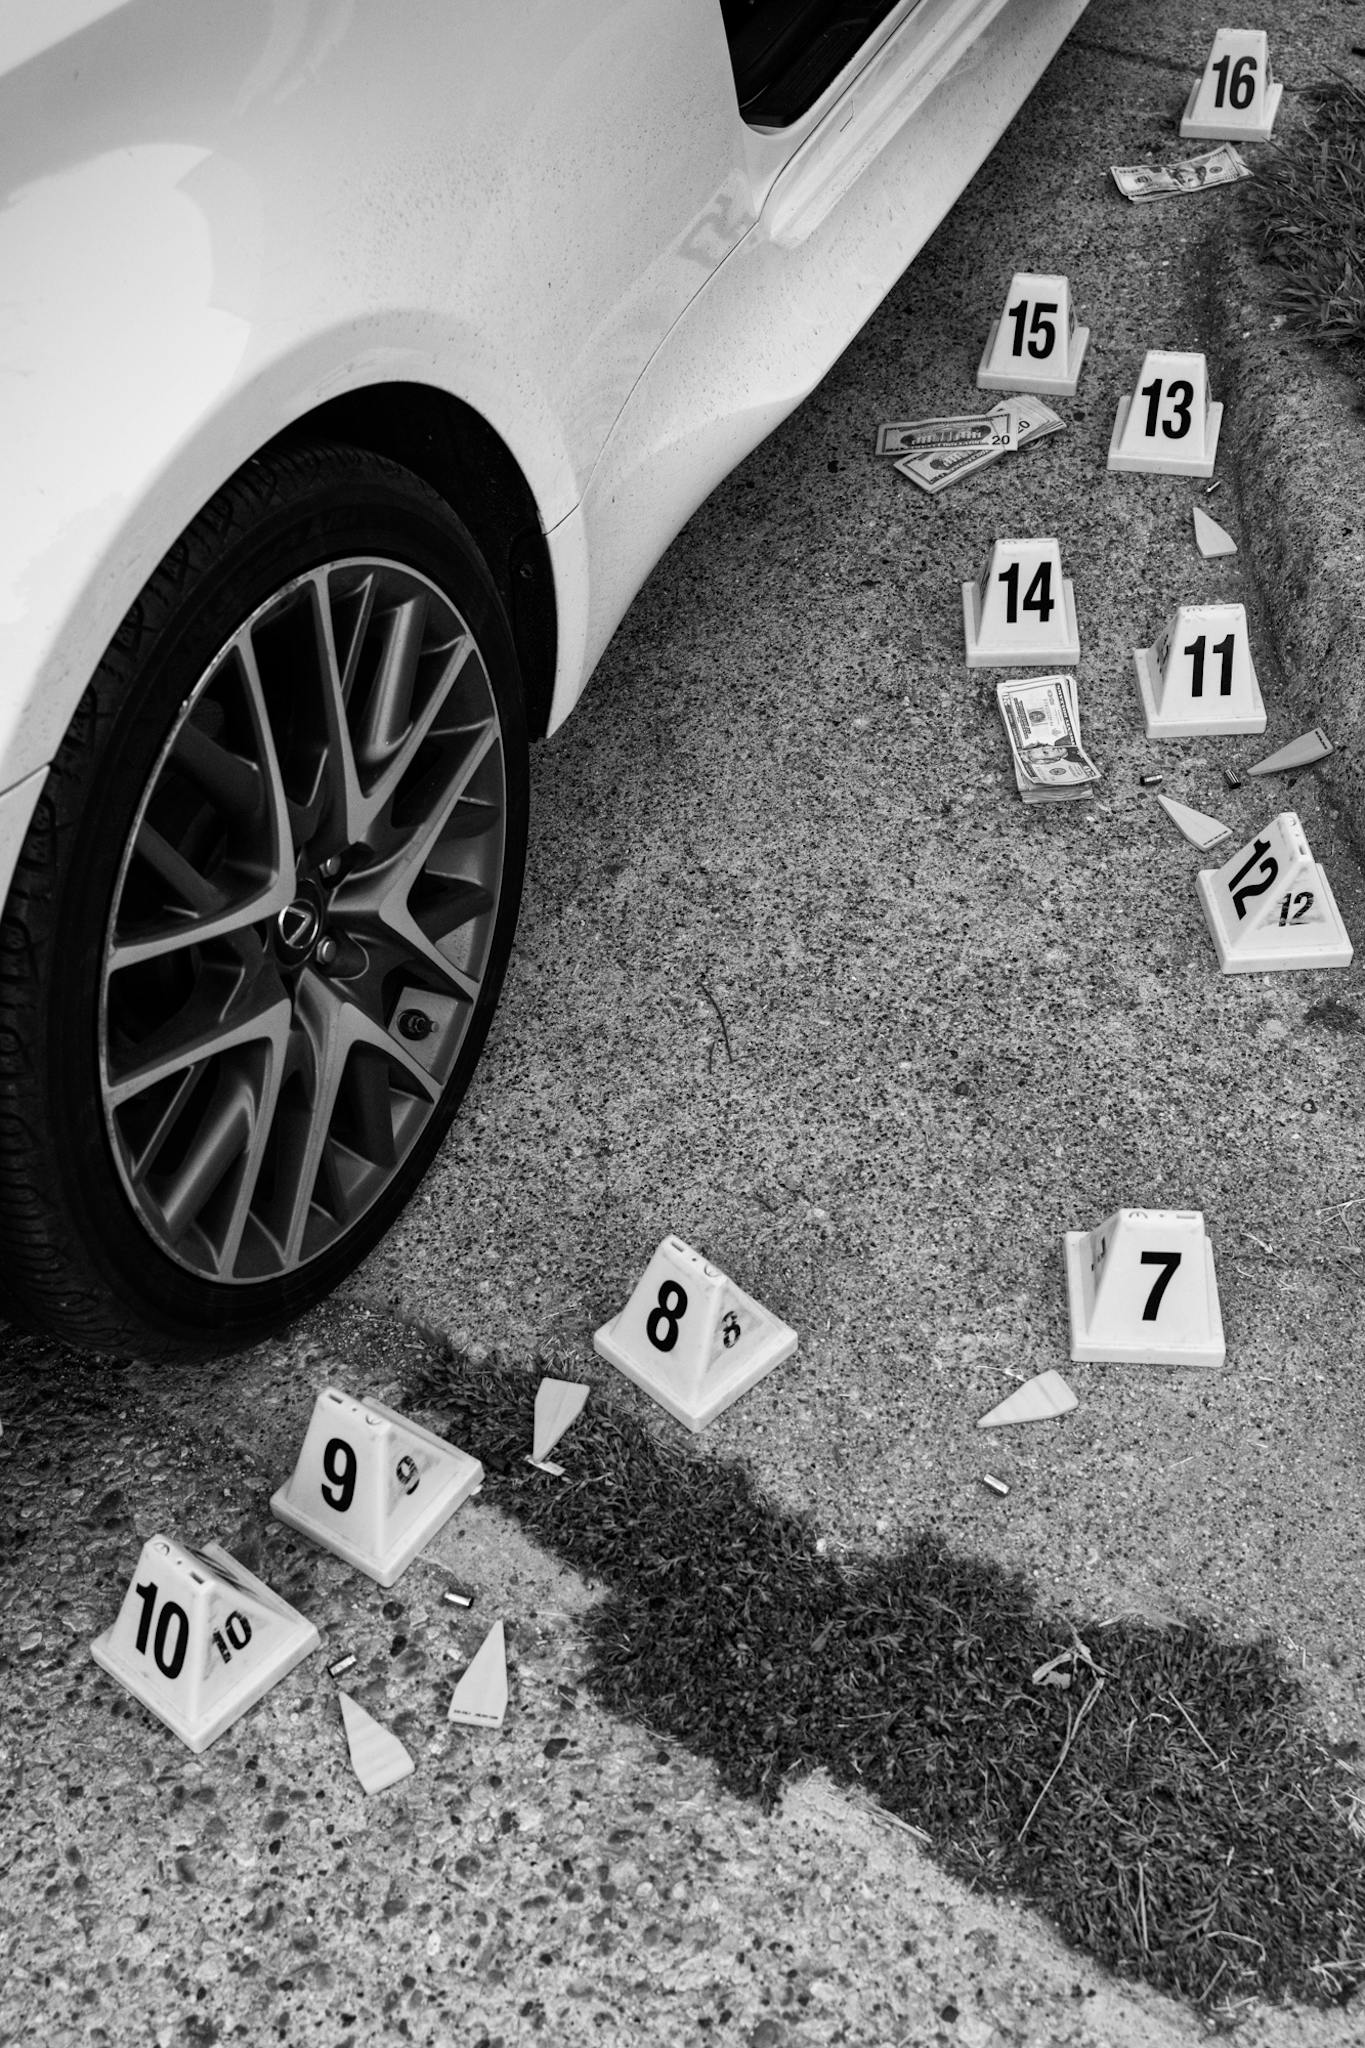 Evidence markers for bullet casings and cash next to a victim’s car.